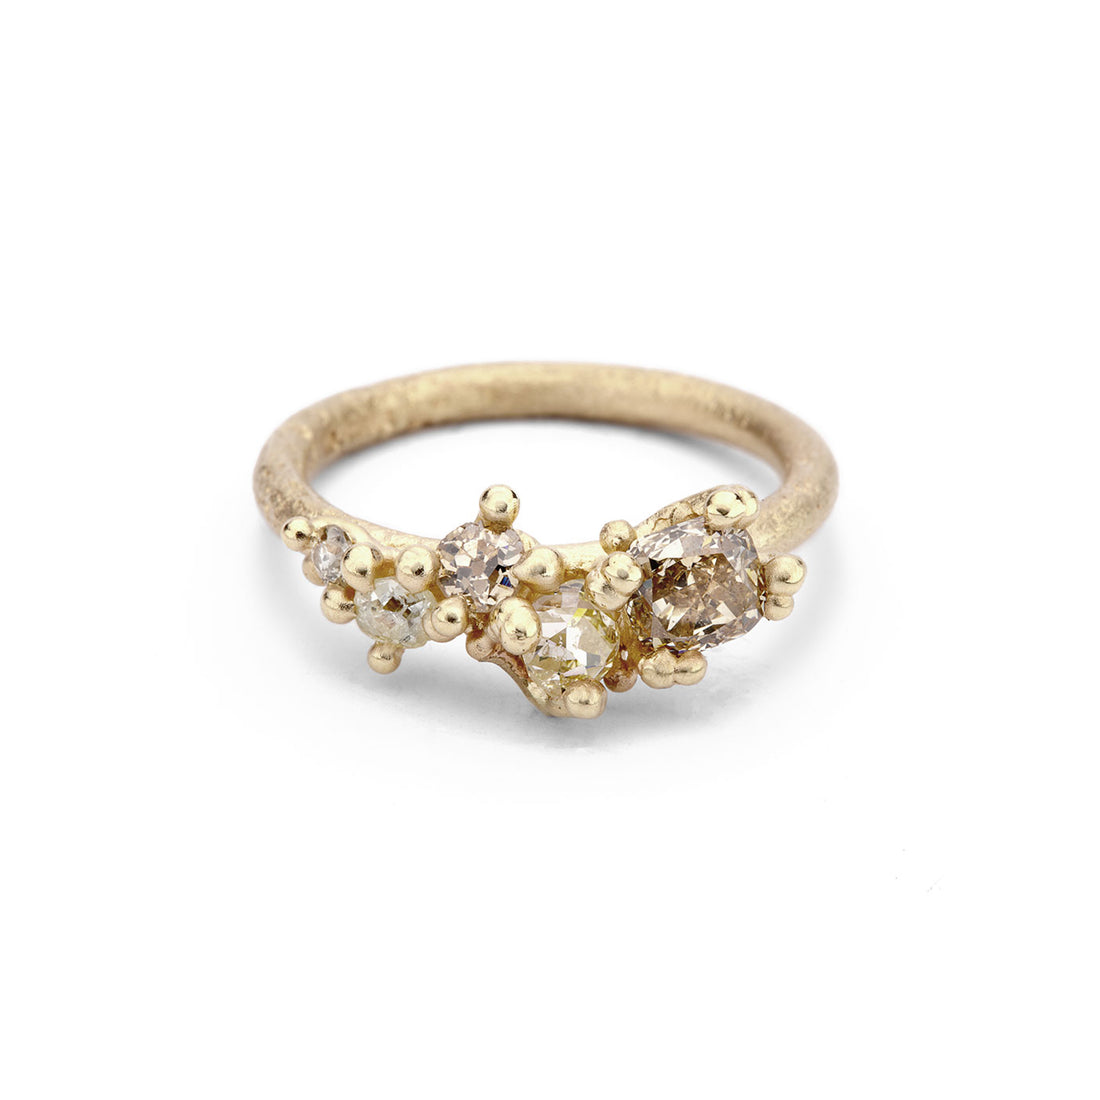  Champagne Diamond Tapering Ring by Ruth Tomlinson | The Cut London